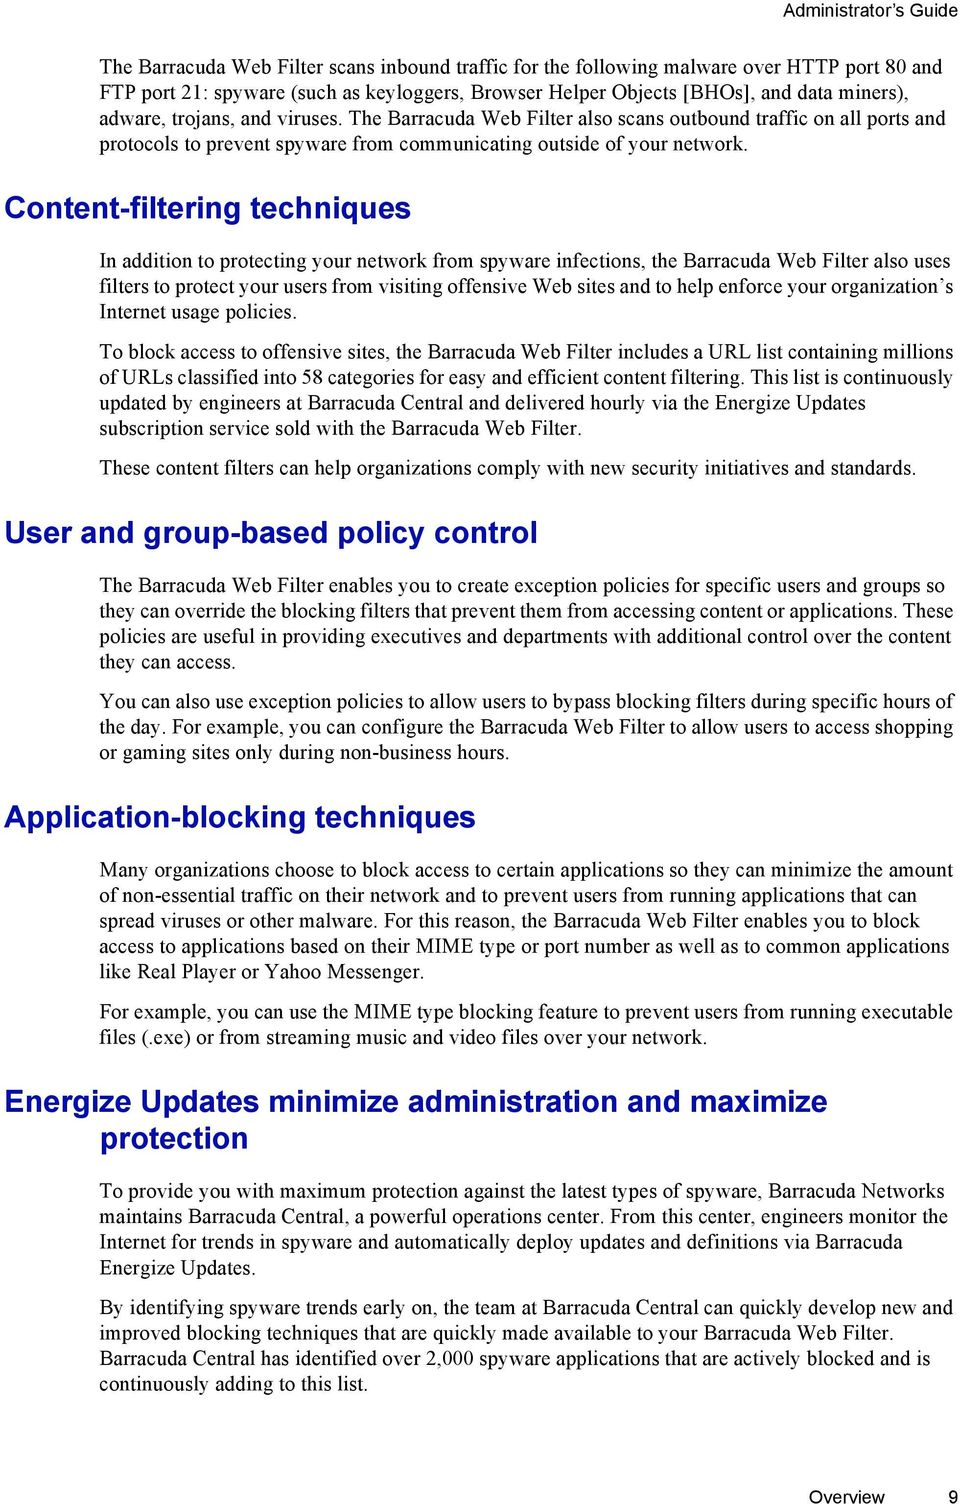 Content-filtering techniques In addition to protecting your network from spyware infections, the Barracuda Web Filter also uses filters to protect your users from visiting offensive Web sites and to